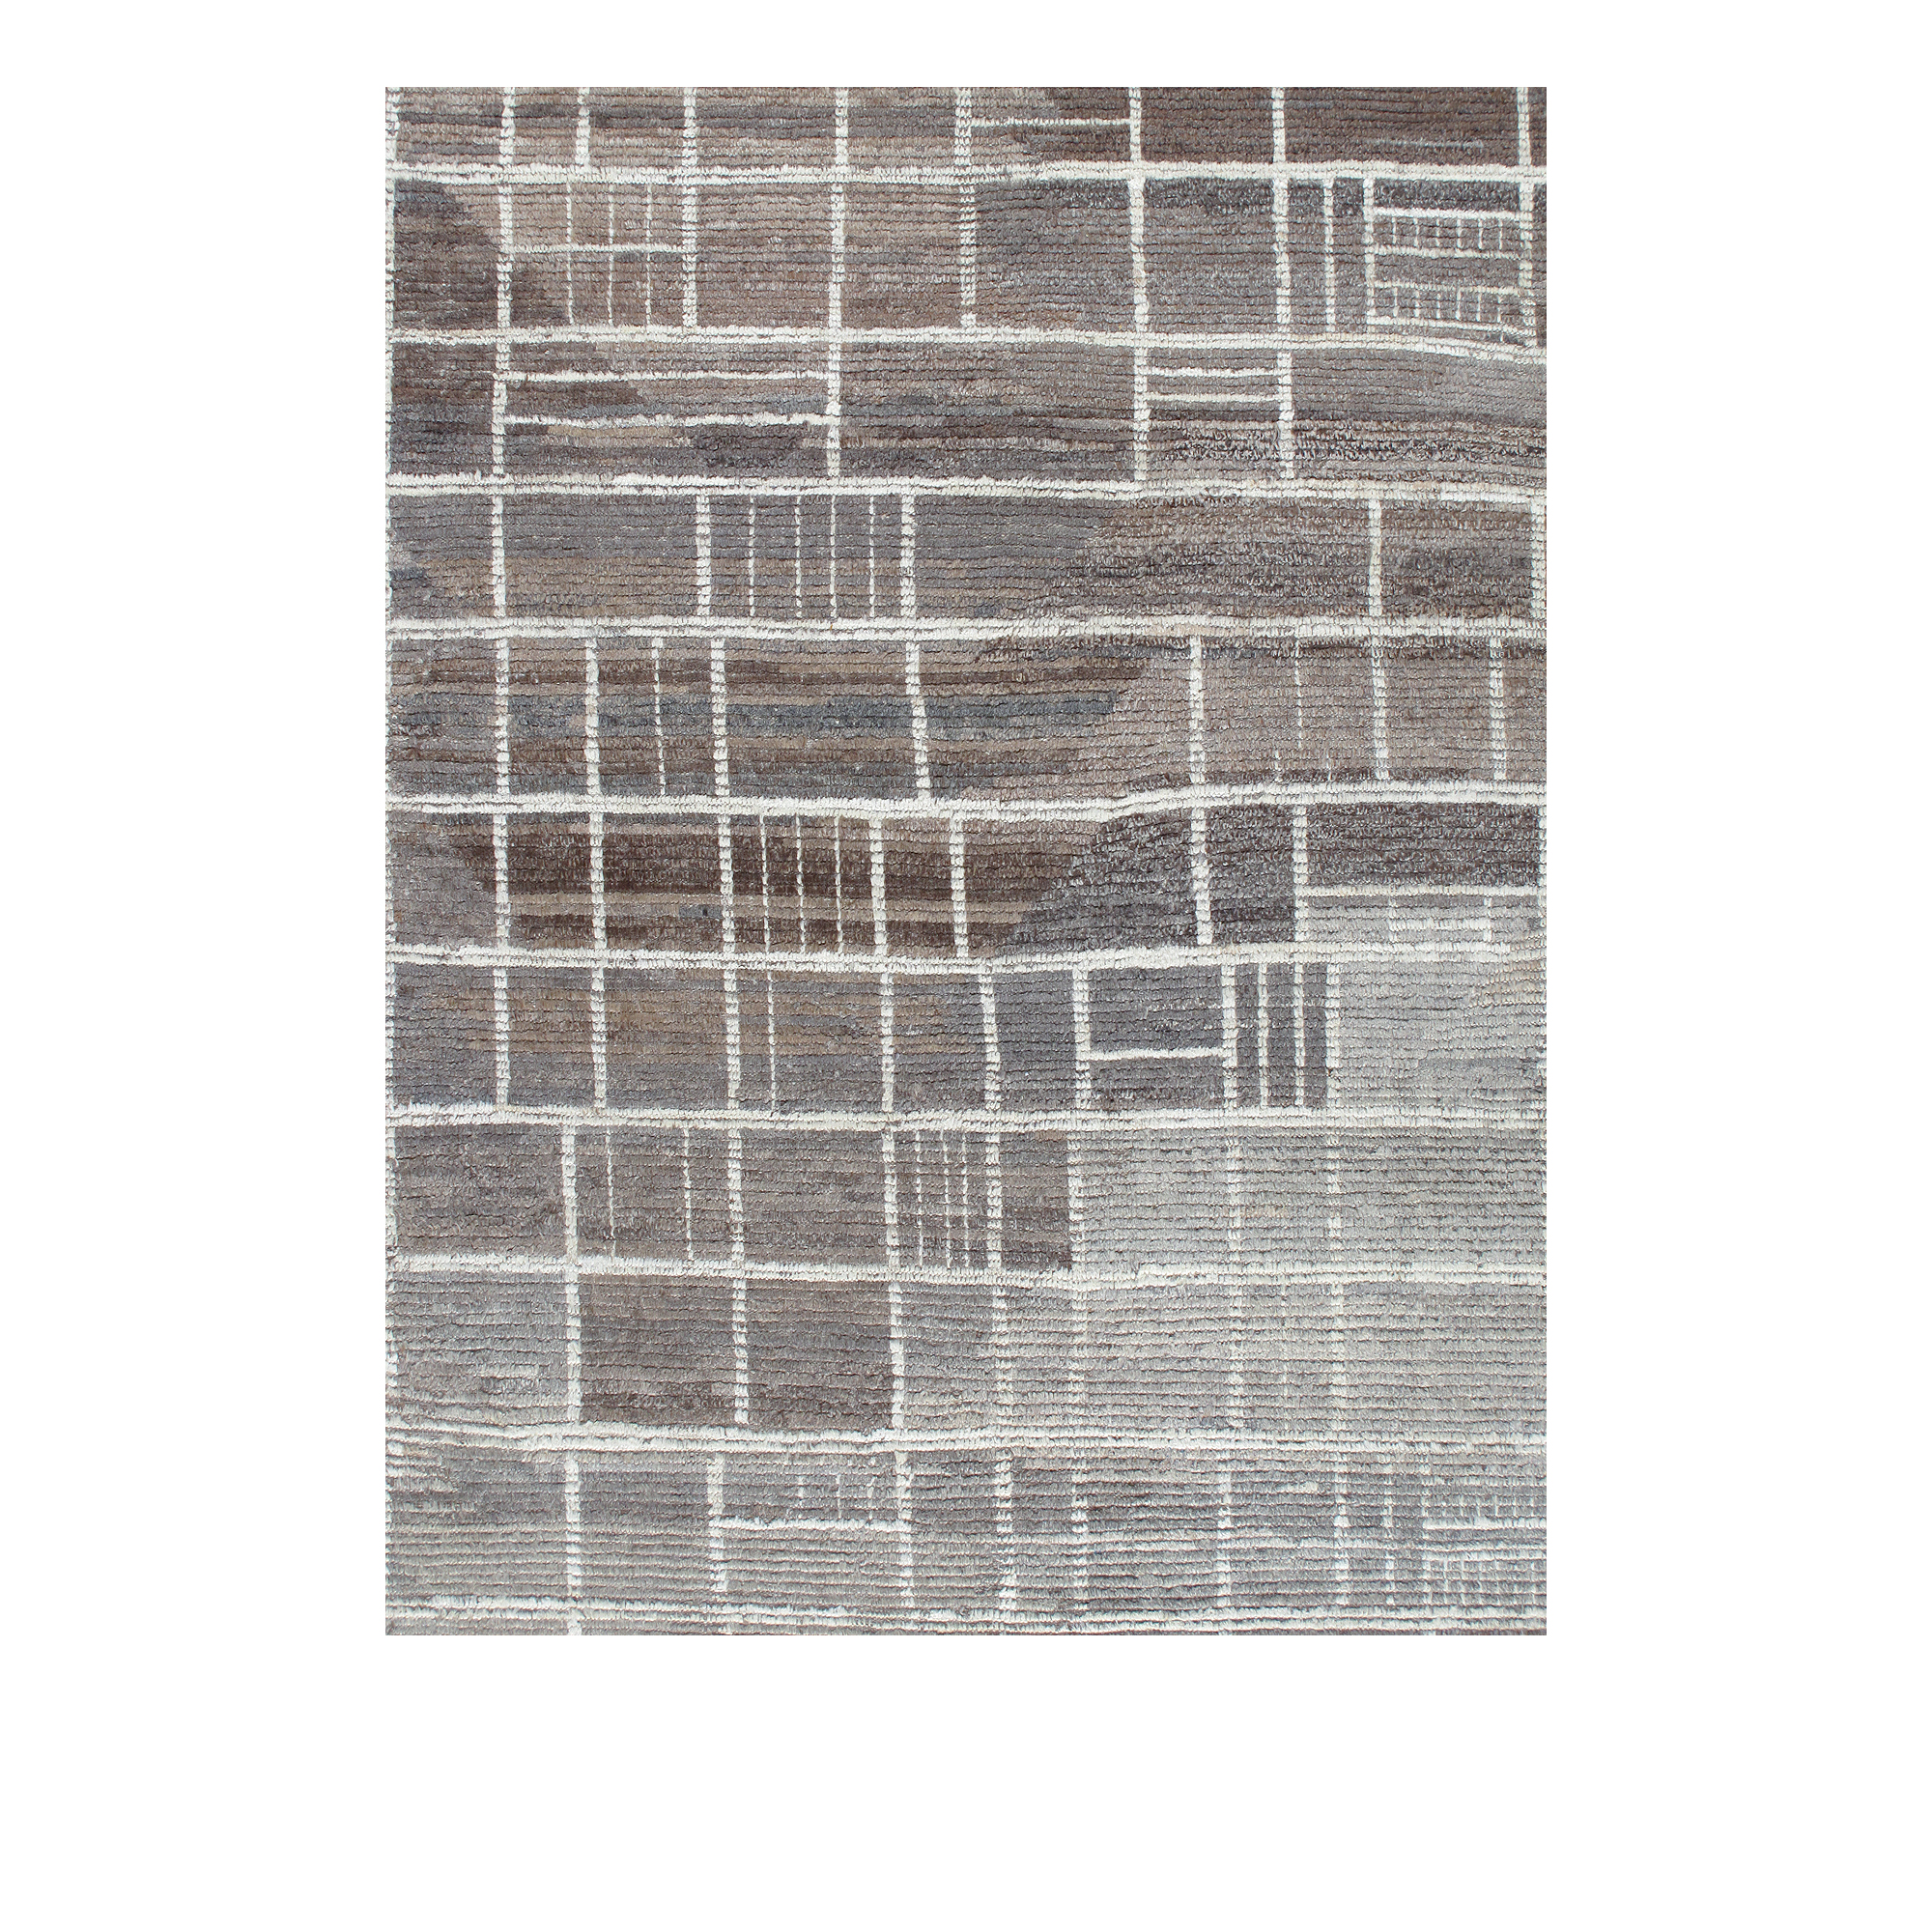 Tetris rug is a hand-knotted transitional piece made from naturally dyed wool. 